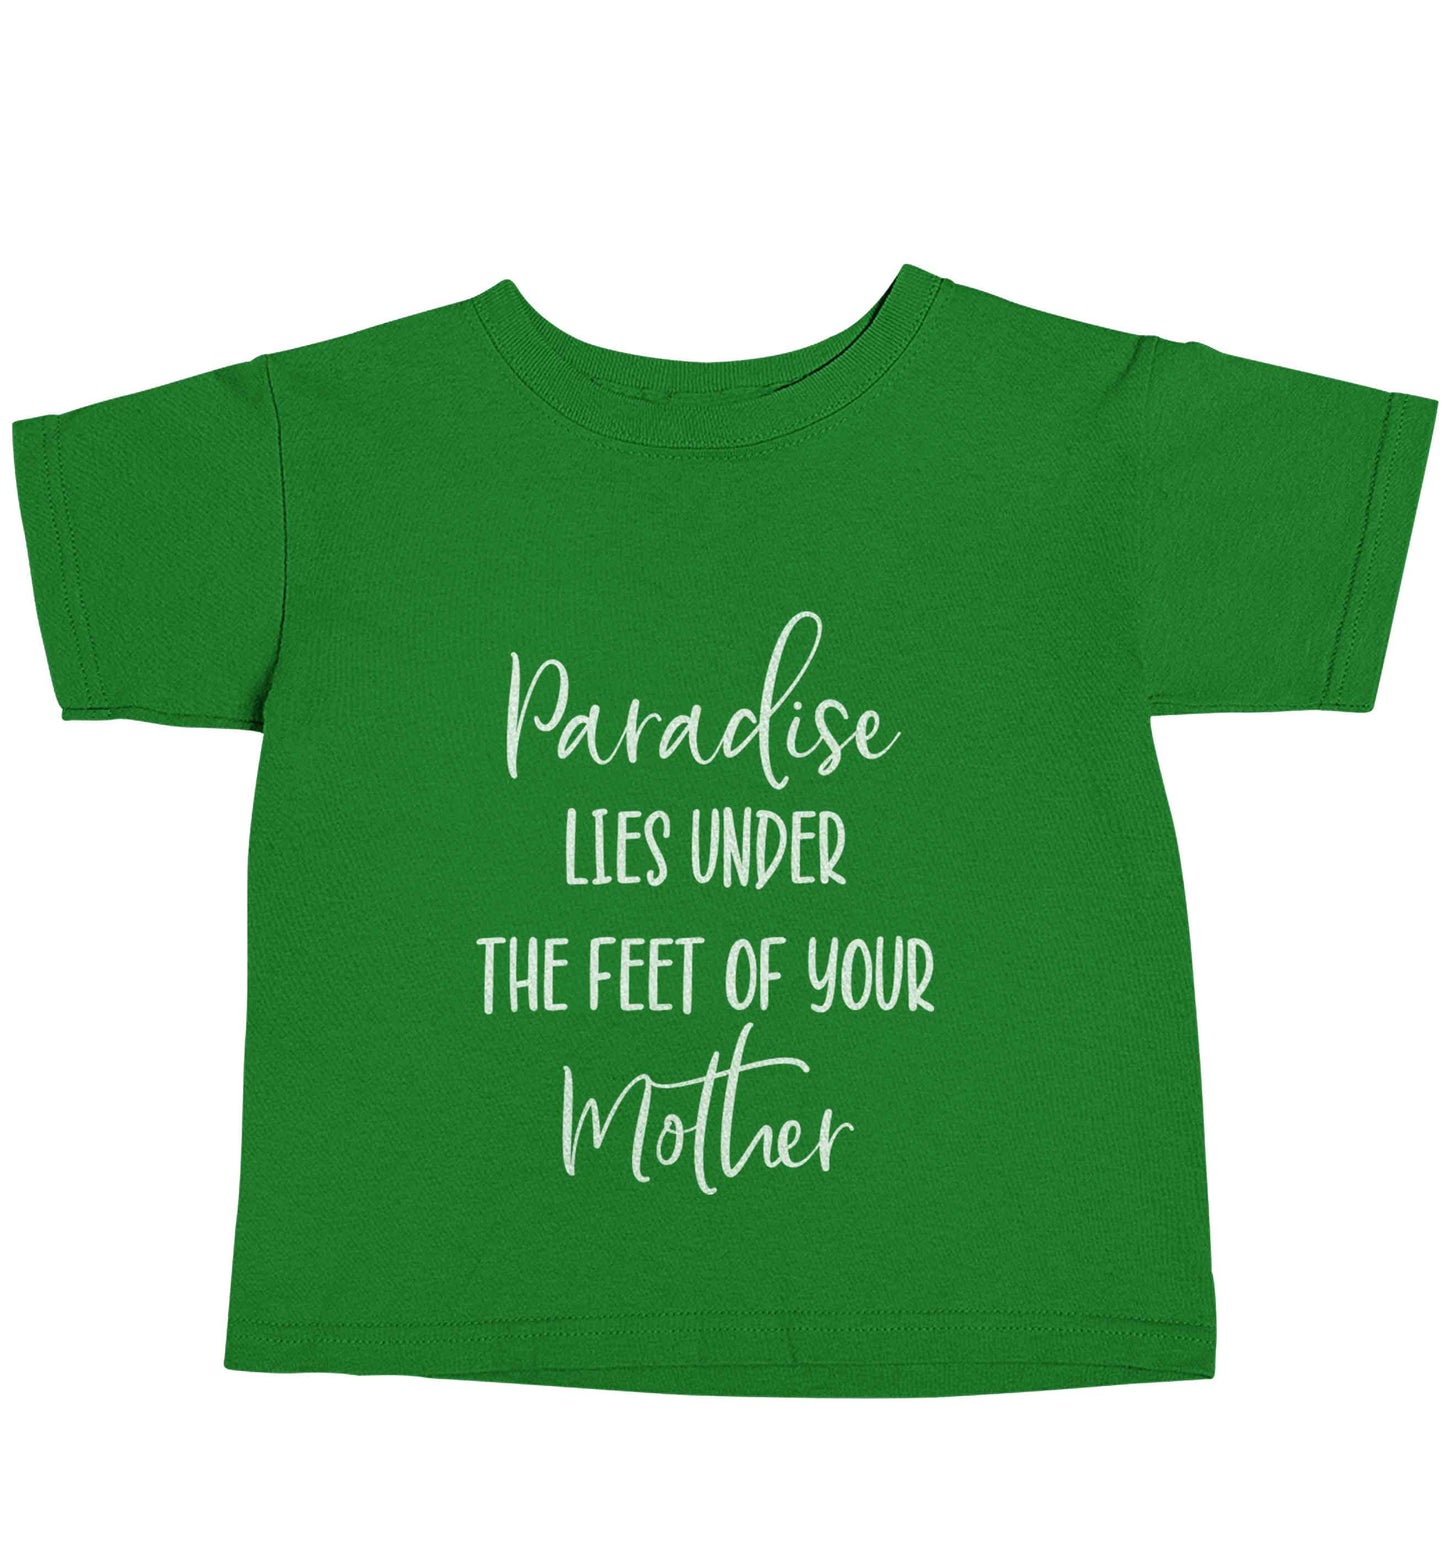 Paradise lies under the feet of your mother green baby toddler Tshirt 2 Years